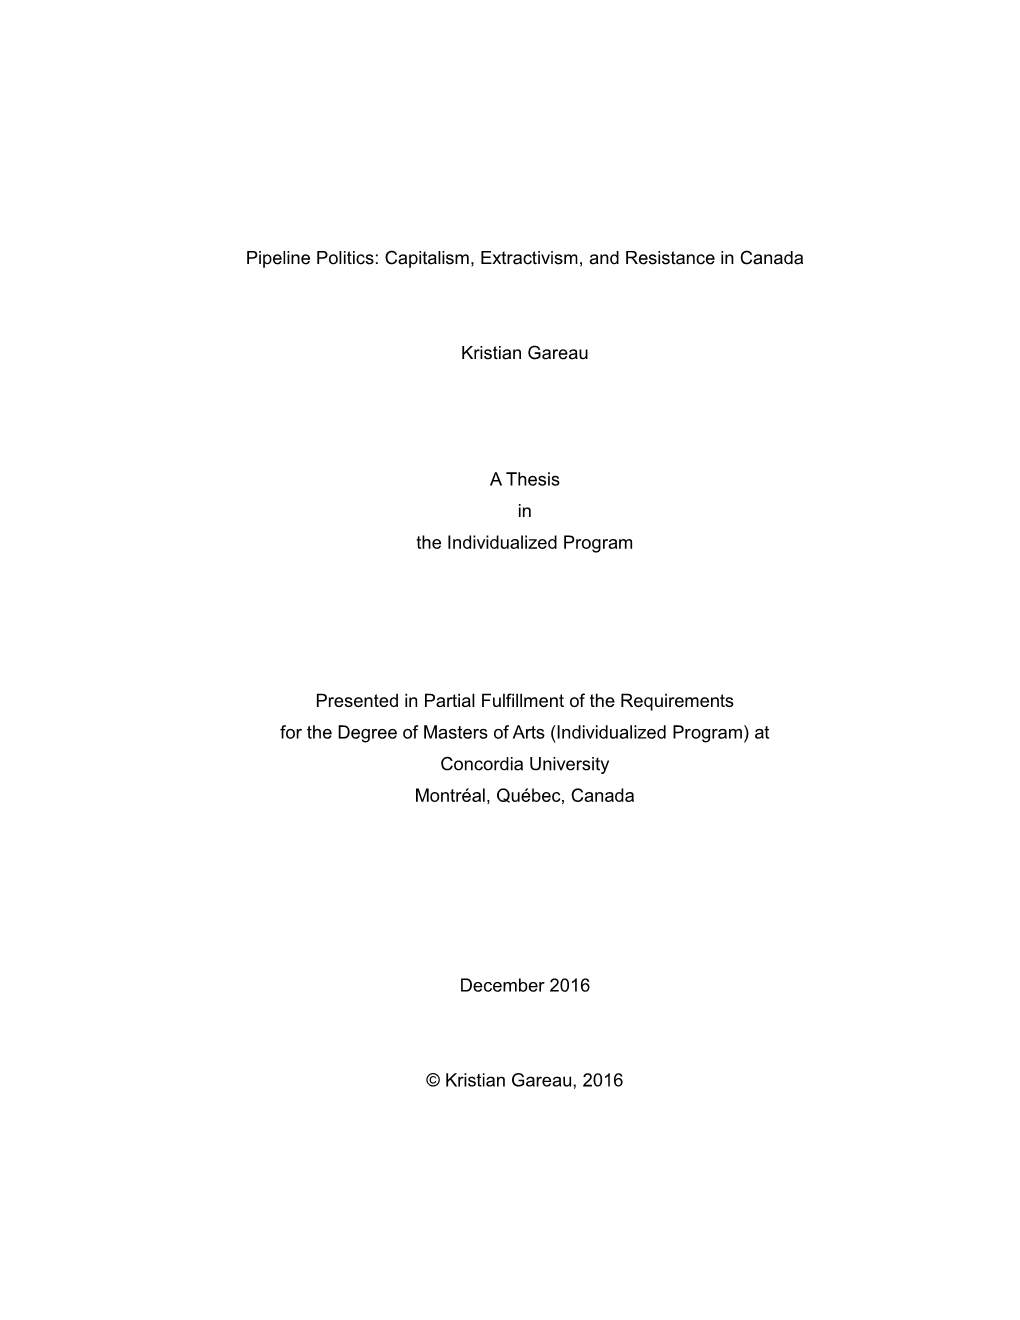 Pipeline Politics: Capitalism, Extractivism, and Resistance in Canada